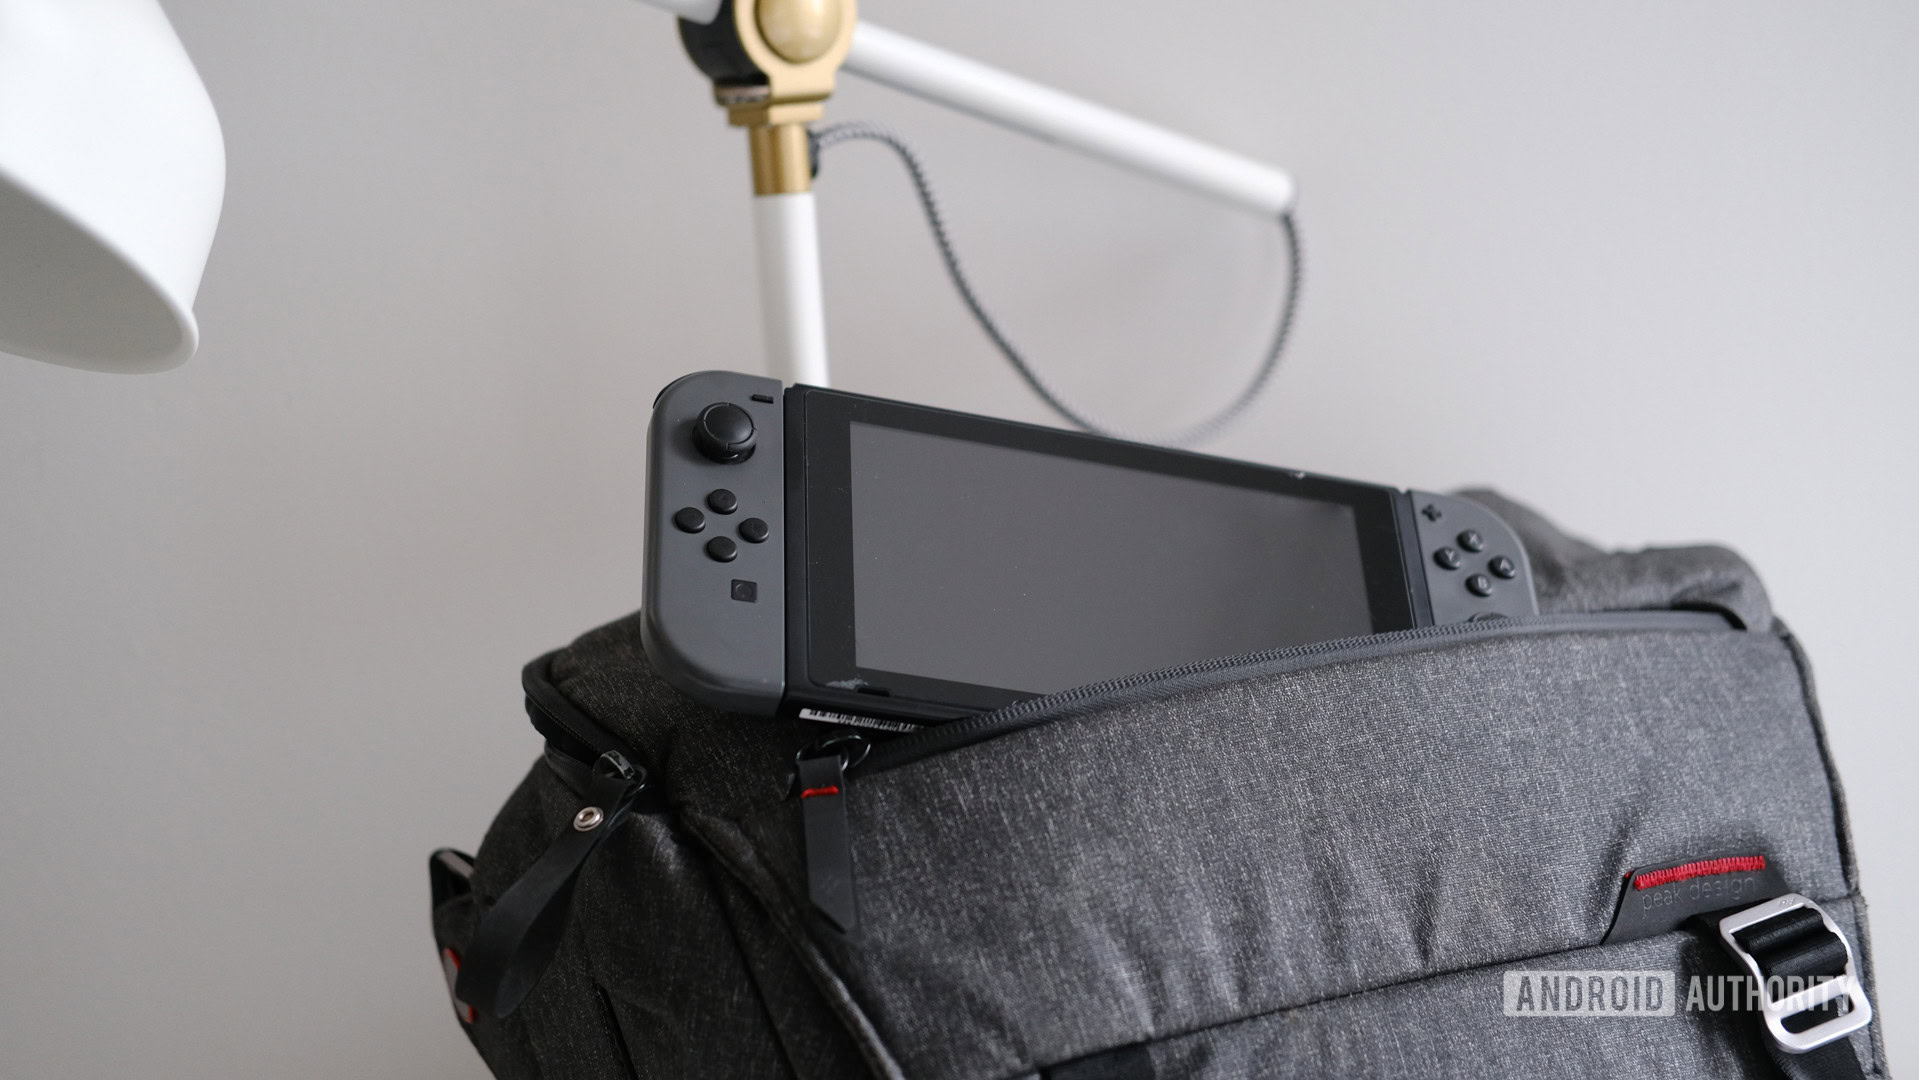 Four things you should get for your Nintendo Switch before it arrives - The  Verge